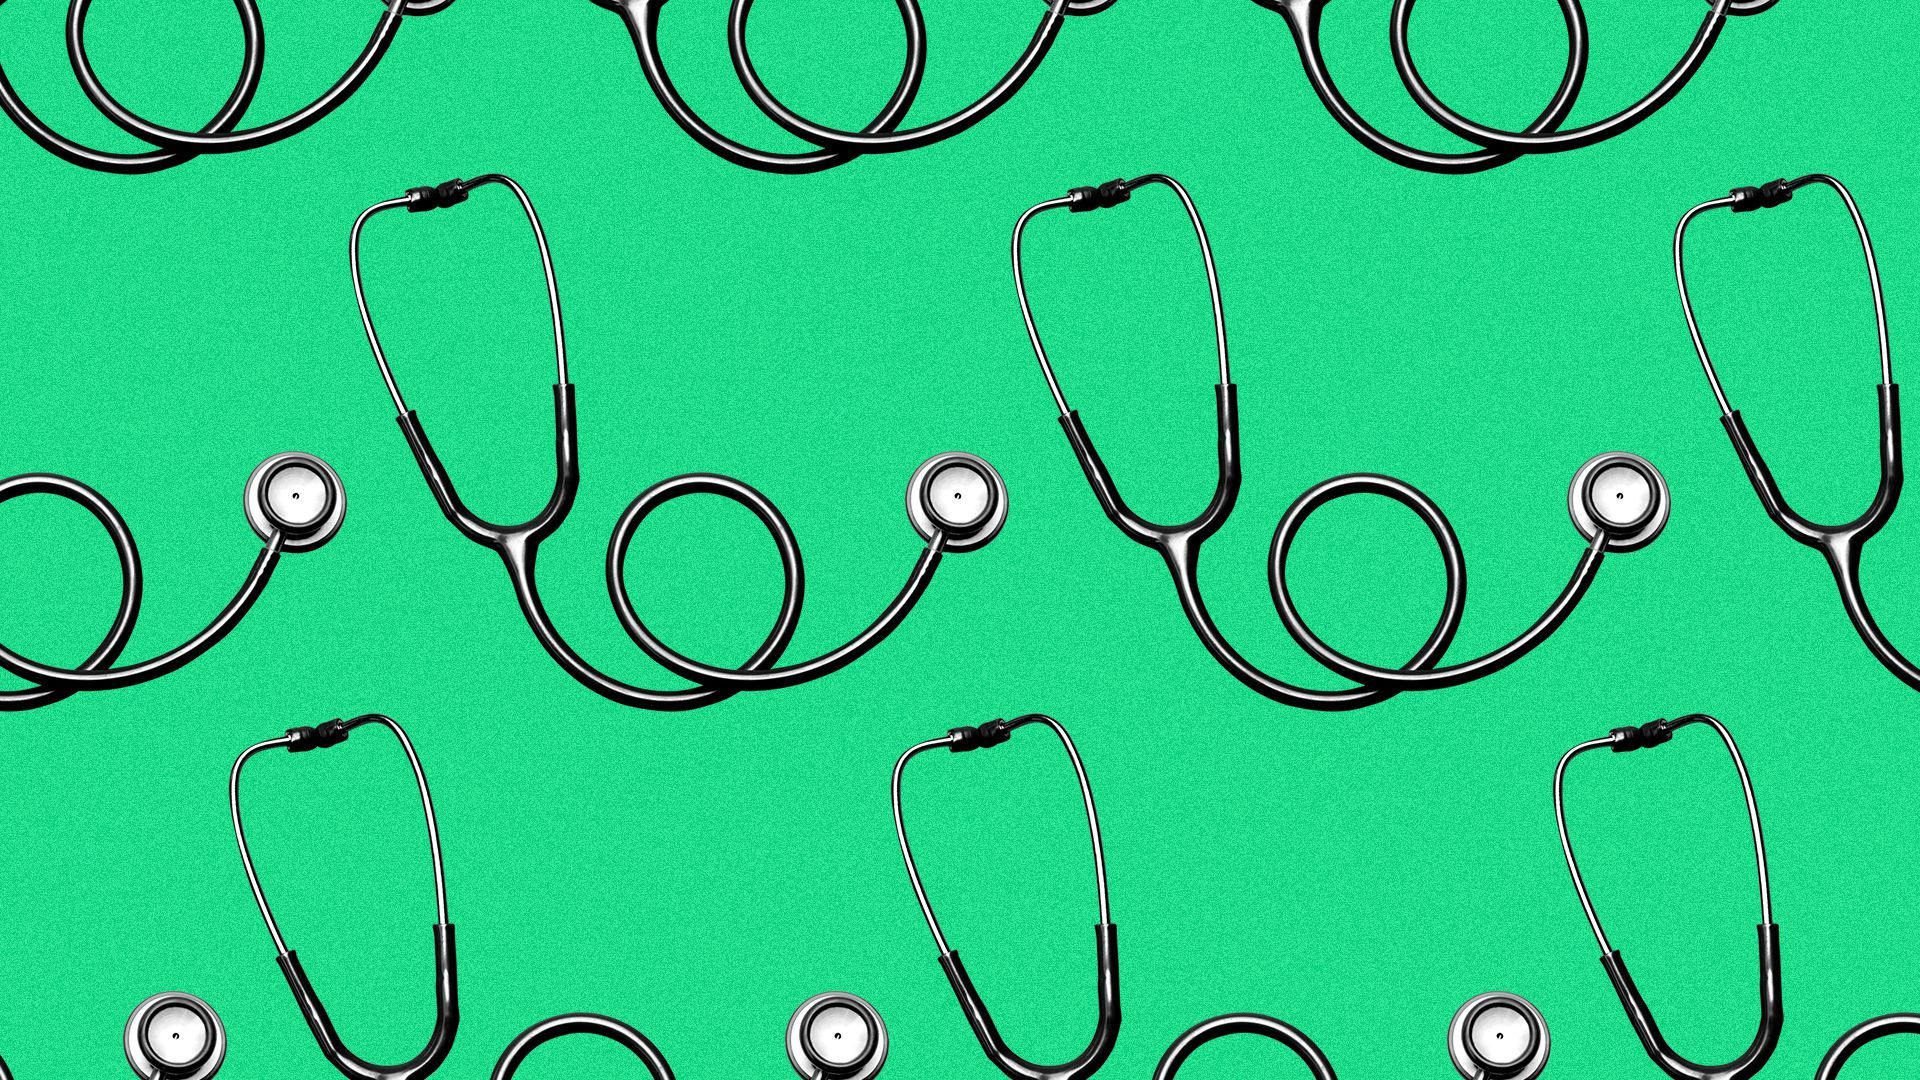 Illustration of a pattern of stethoscopes.